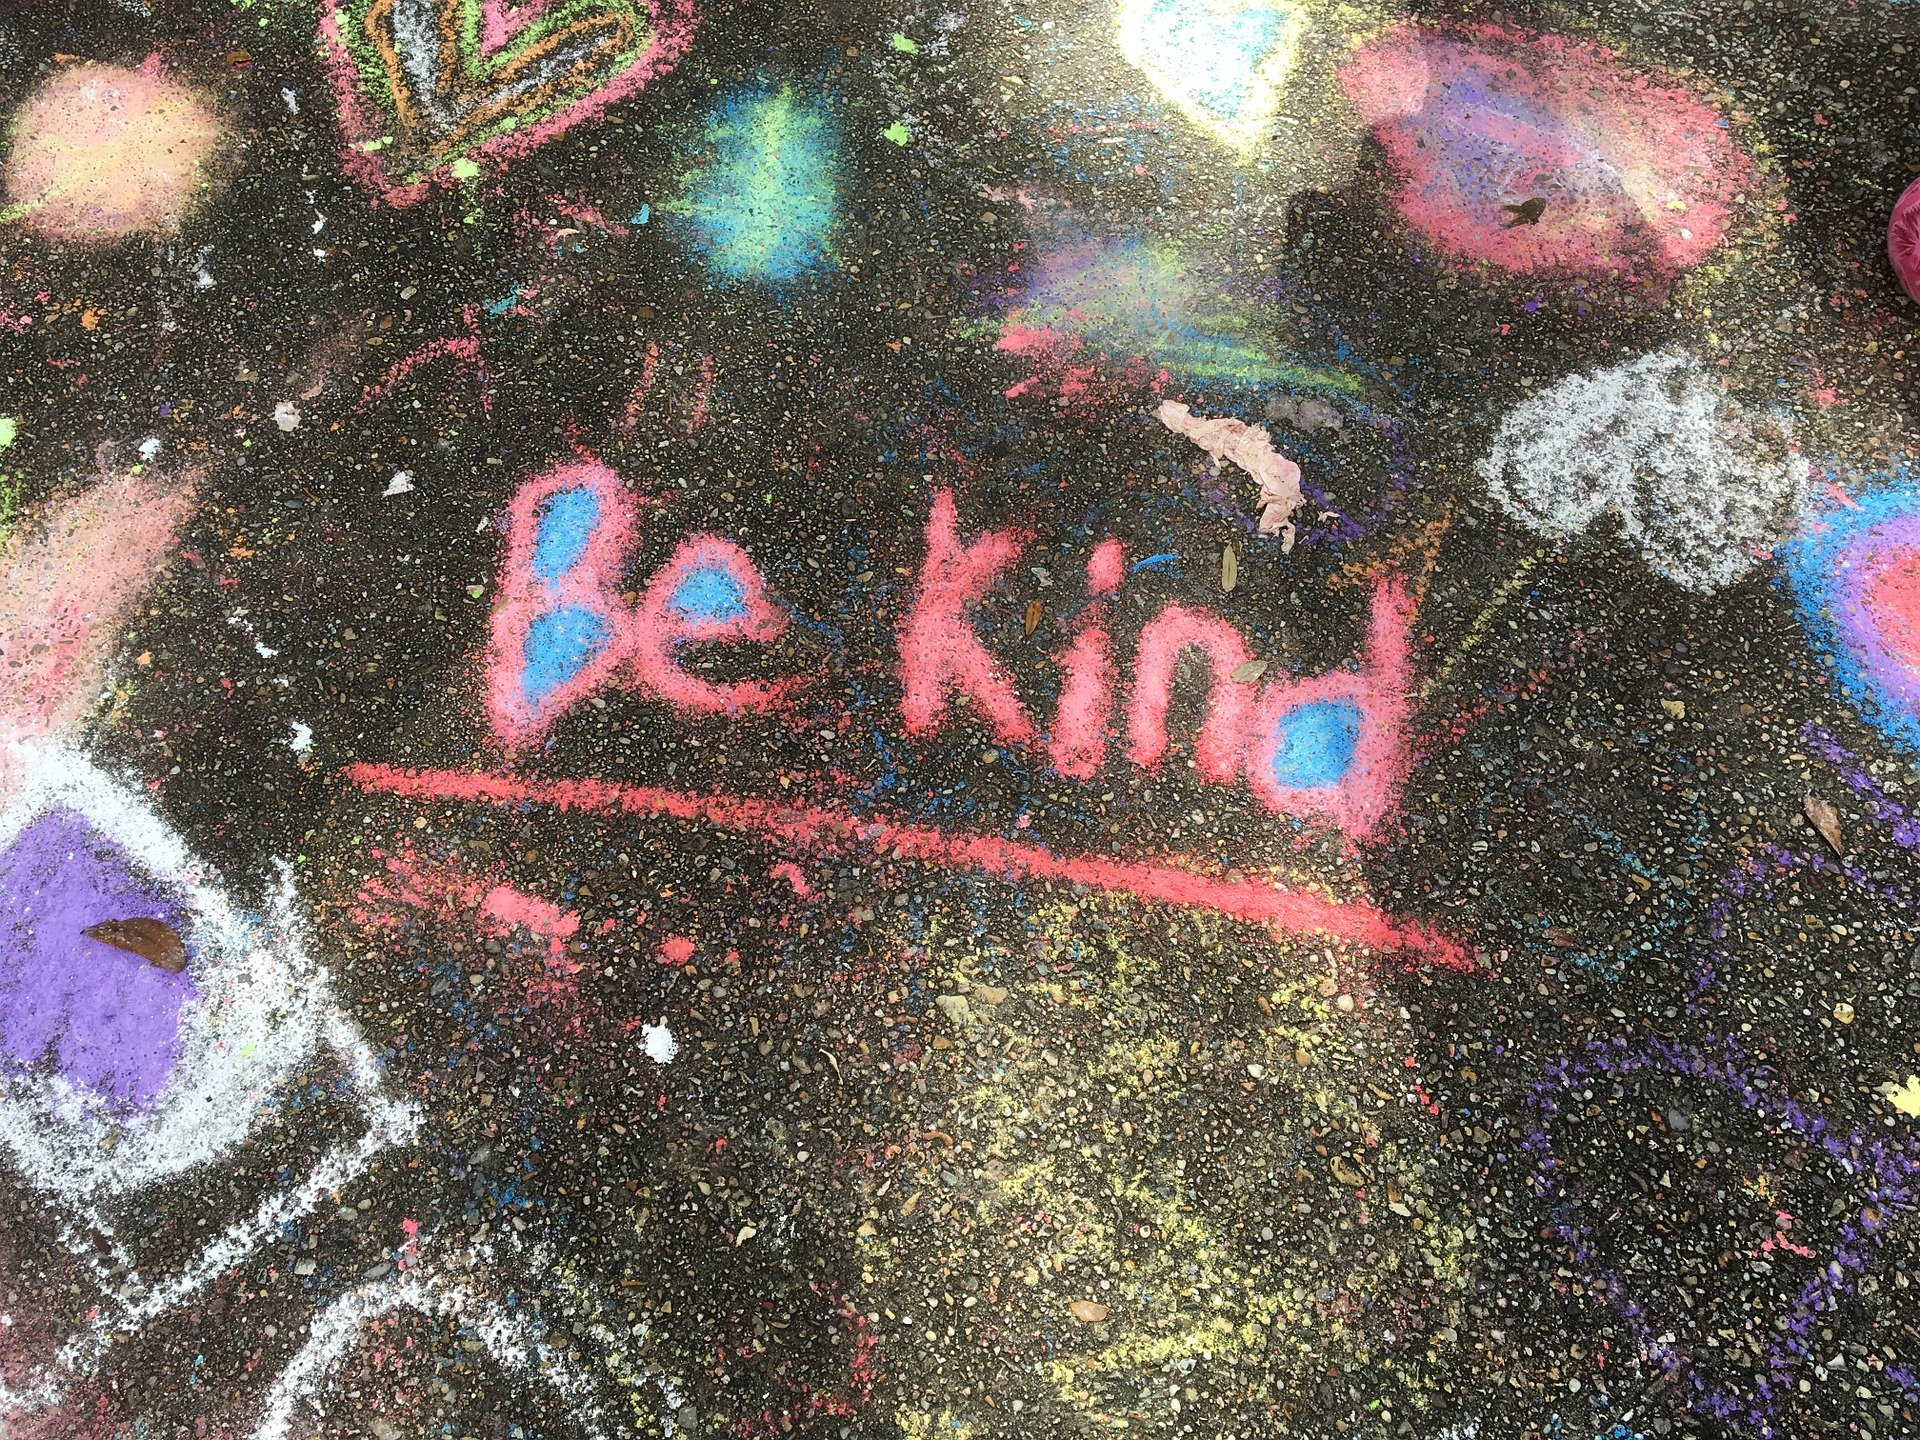 "Be kind" written in bright colors in chalk